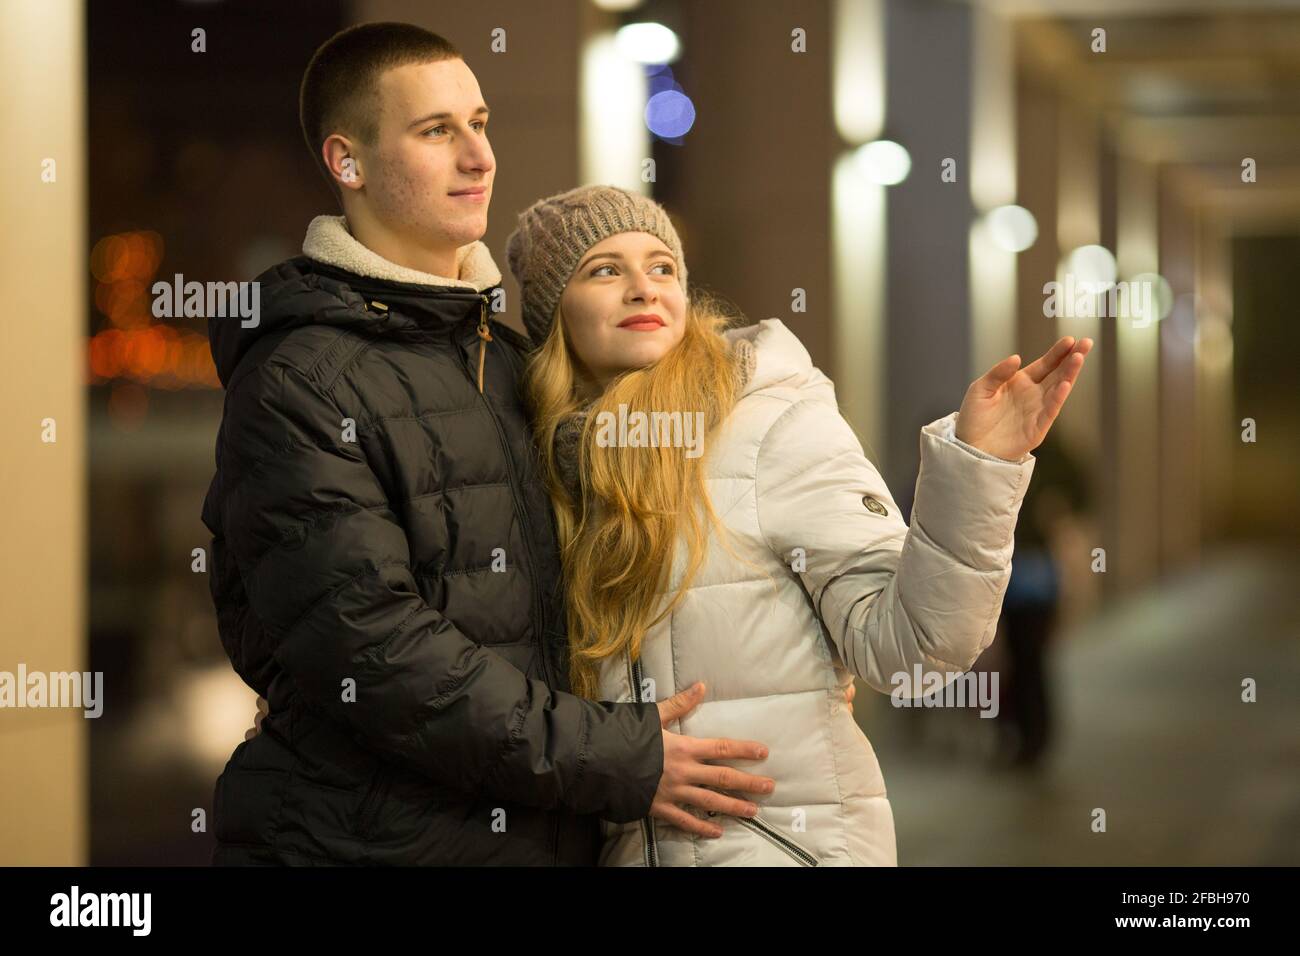 Dnepropetrovsk, Ukraine - 09.12.2016: A couple of young people in front of an expensive store window. Stock Photo